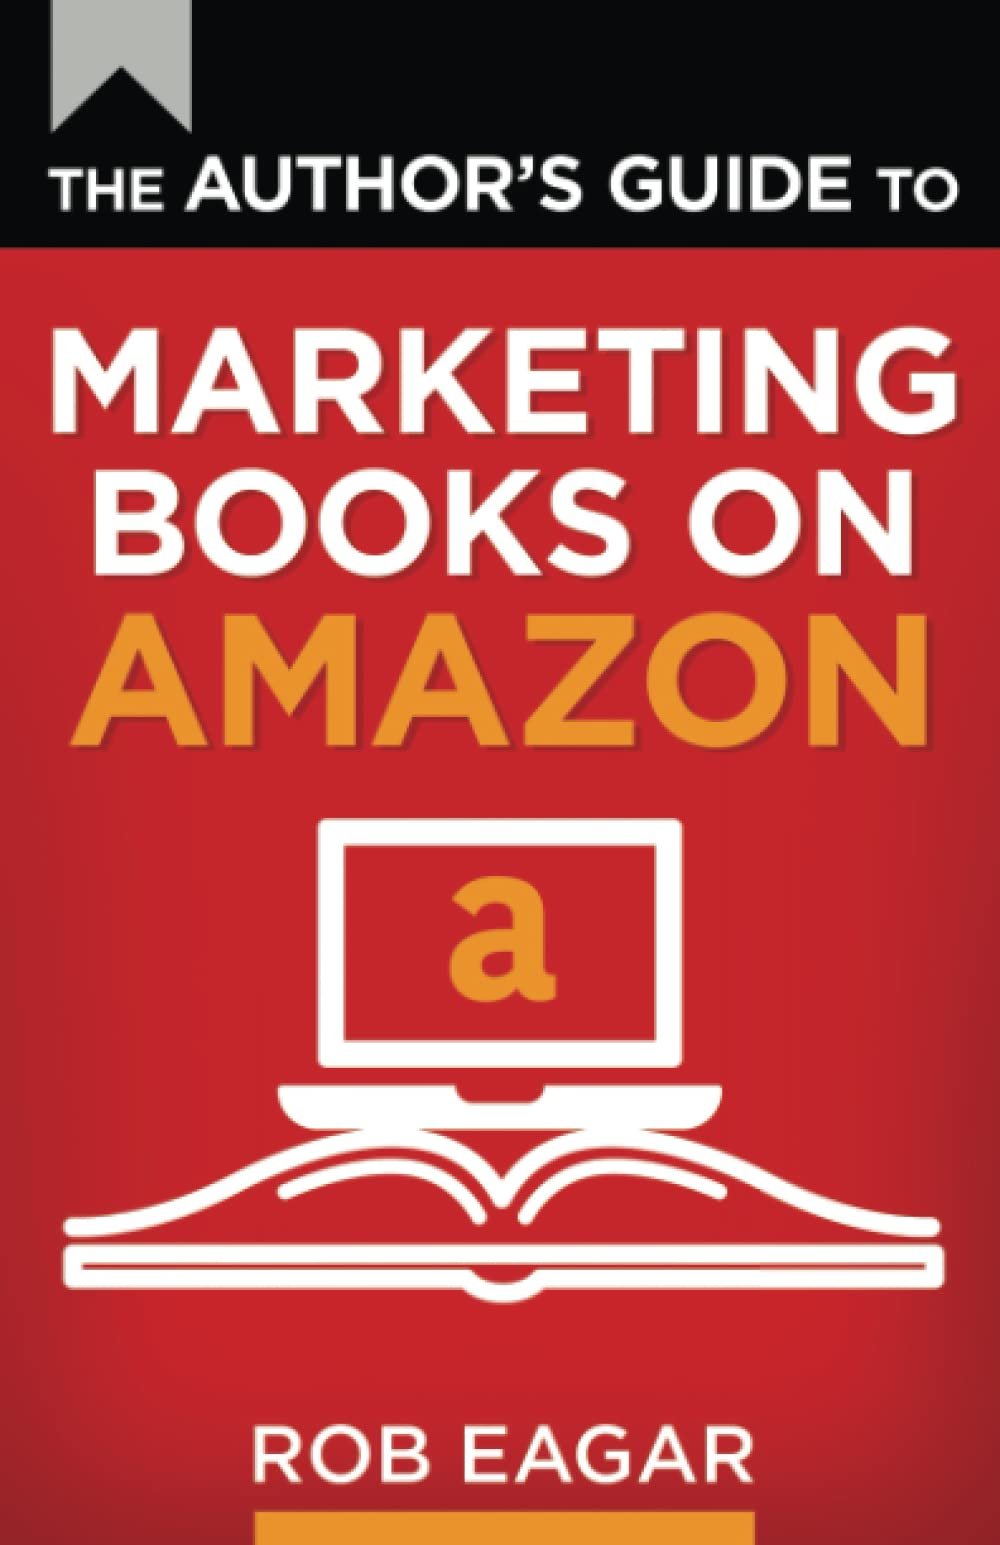 The Author's Guide to Marketing Books on Amazon by Rob Eagar